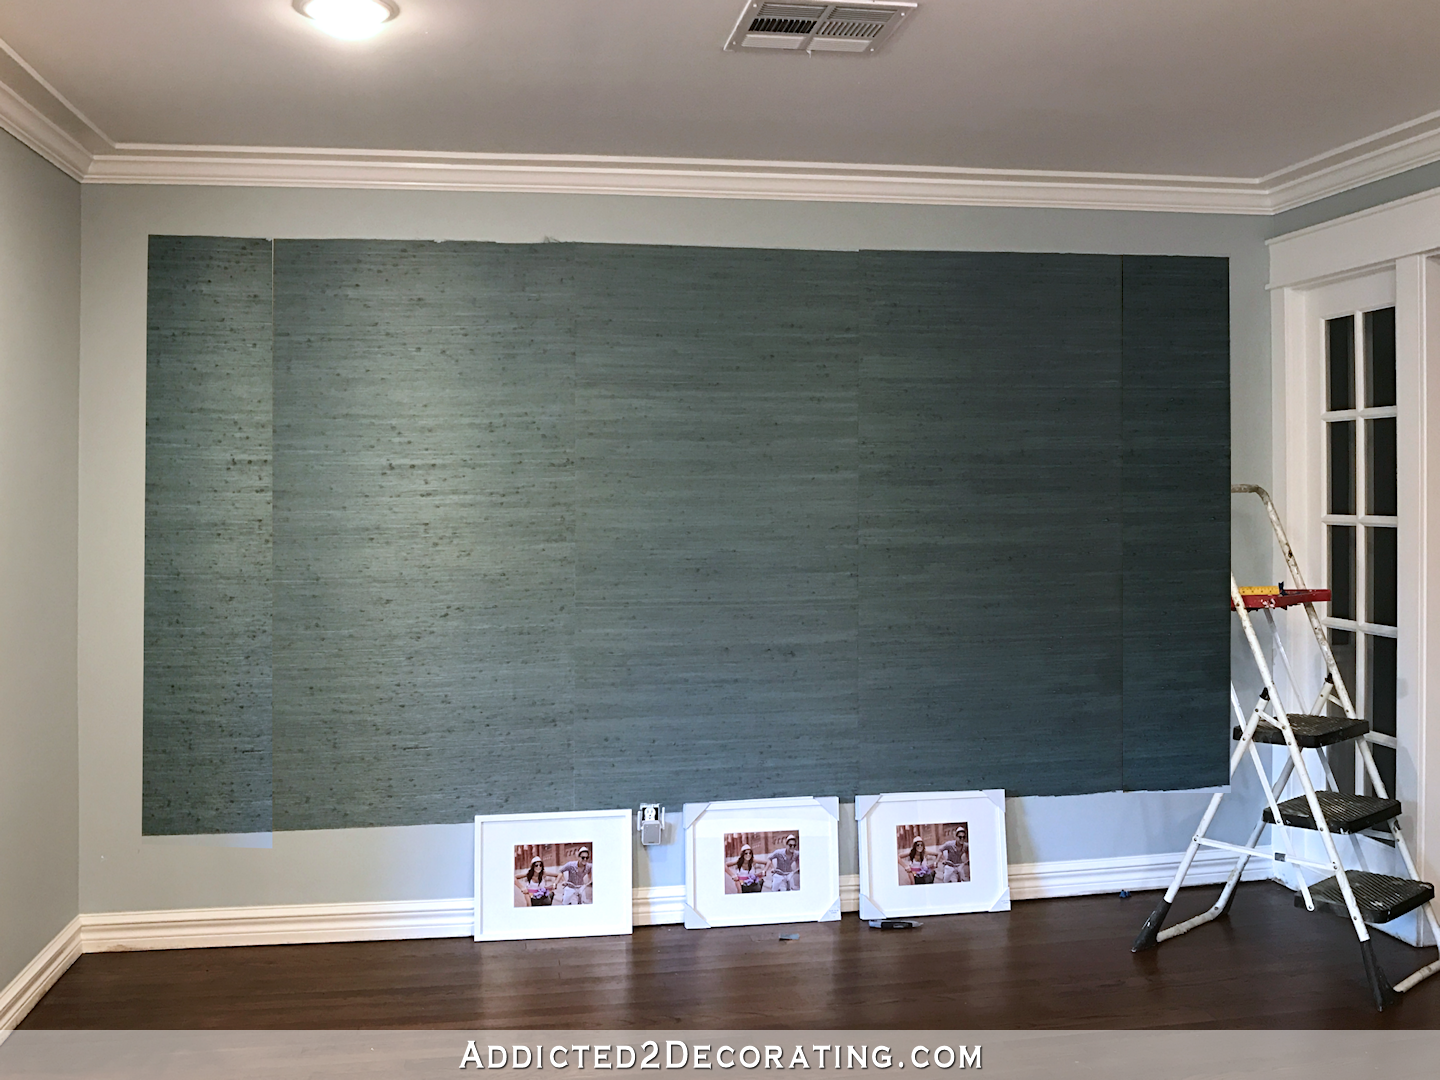 Grasscloth Accent Wall In Entryway - Bedroom Accent Wall Grasscloth - HD Wallpaper 